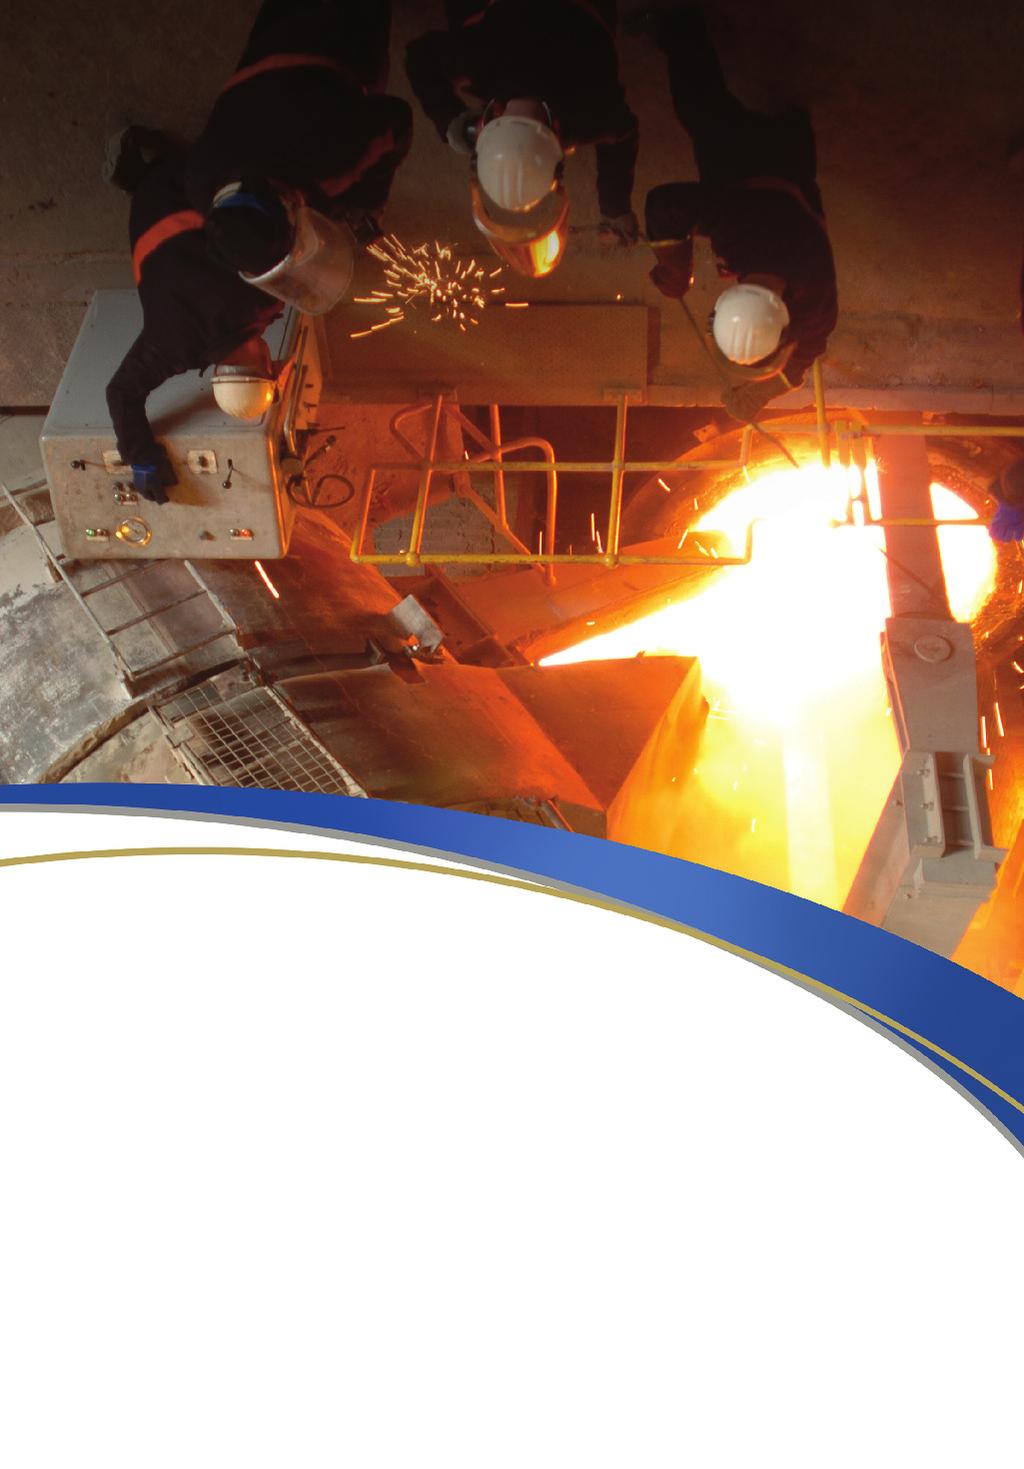 Steel Industry Services to the Steel Industry - Independent research,